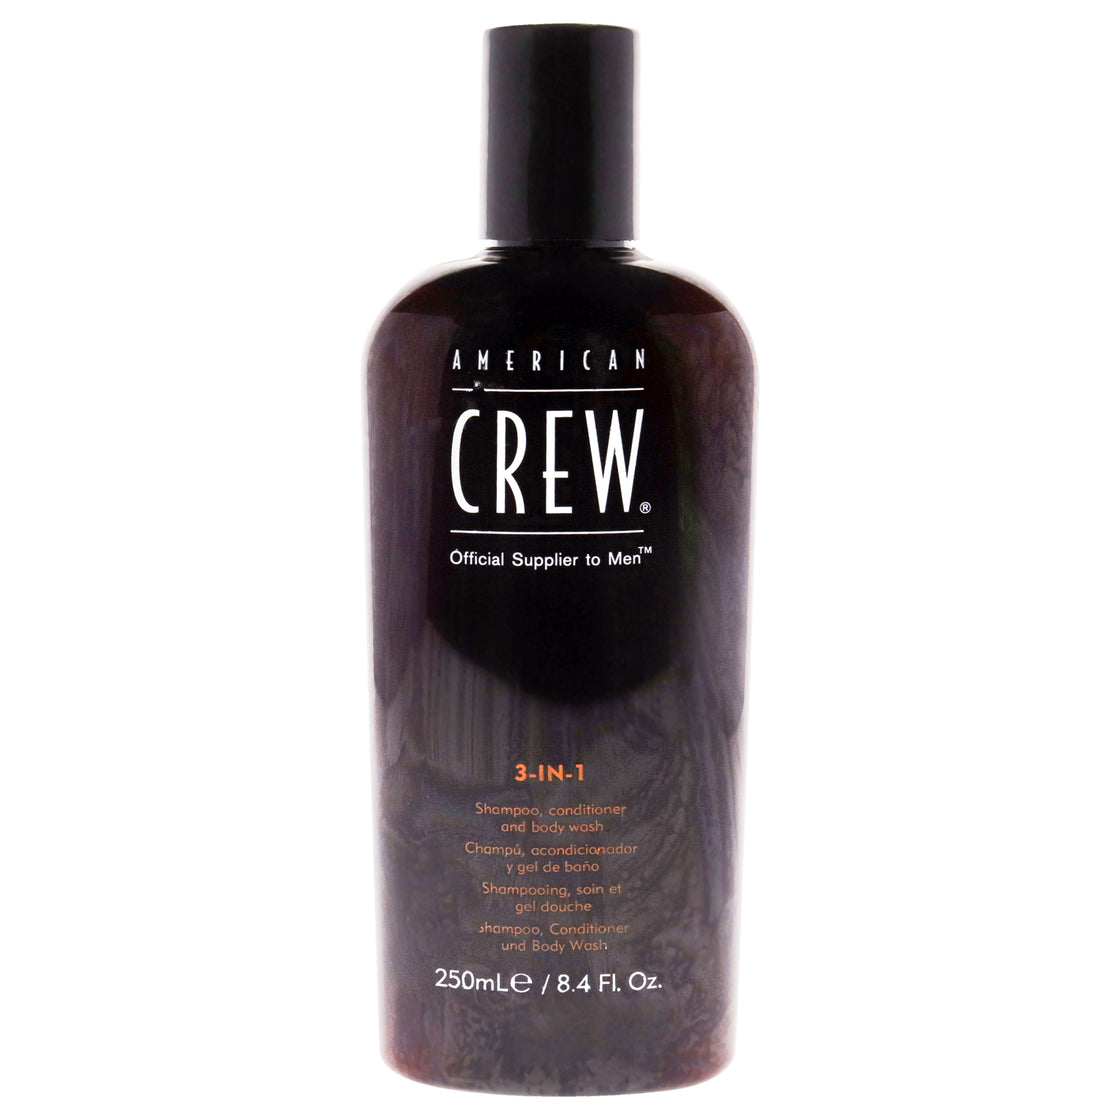 3 In 1 Shampoo, Conditioner and Body Wash by American Crew for Men - 8.4 oz Shampoo, Conditioner and Body Wash